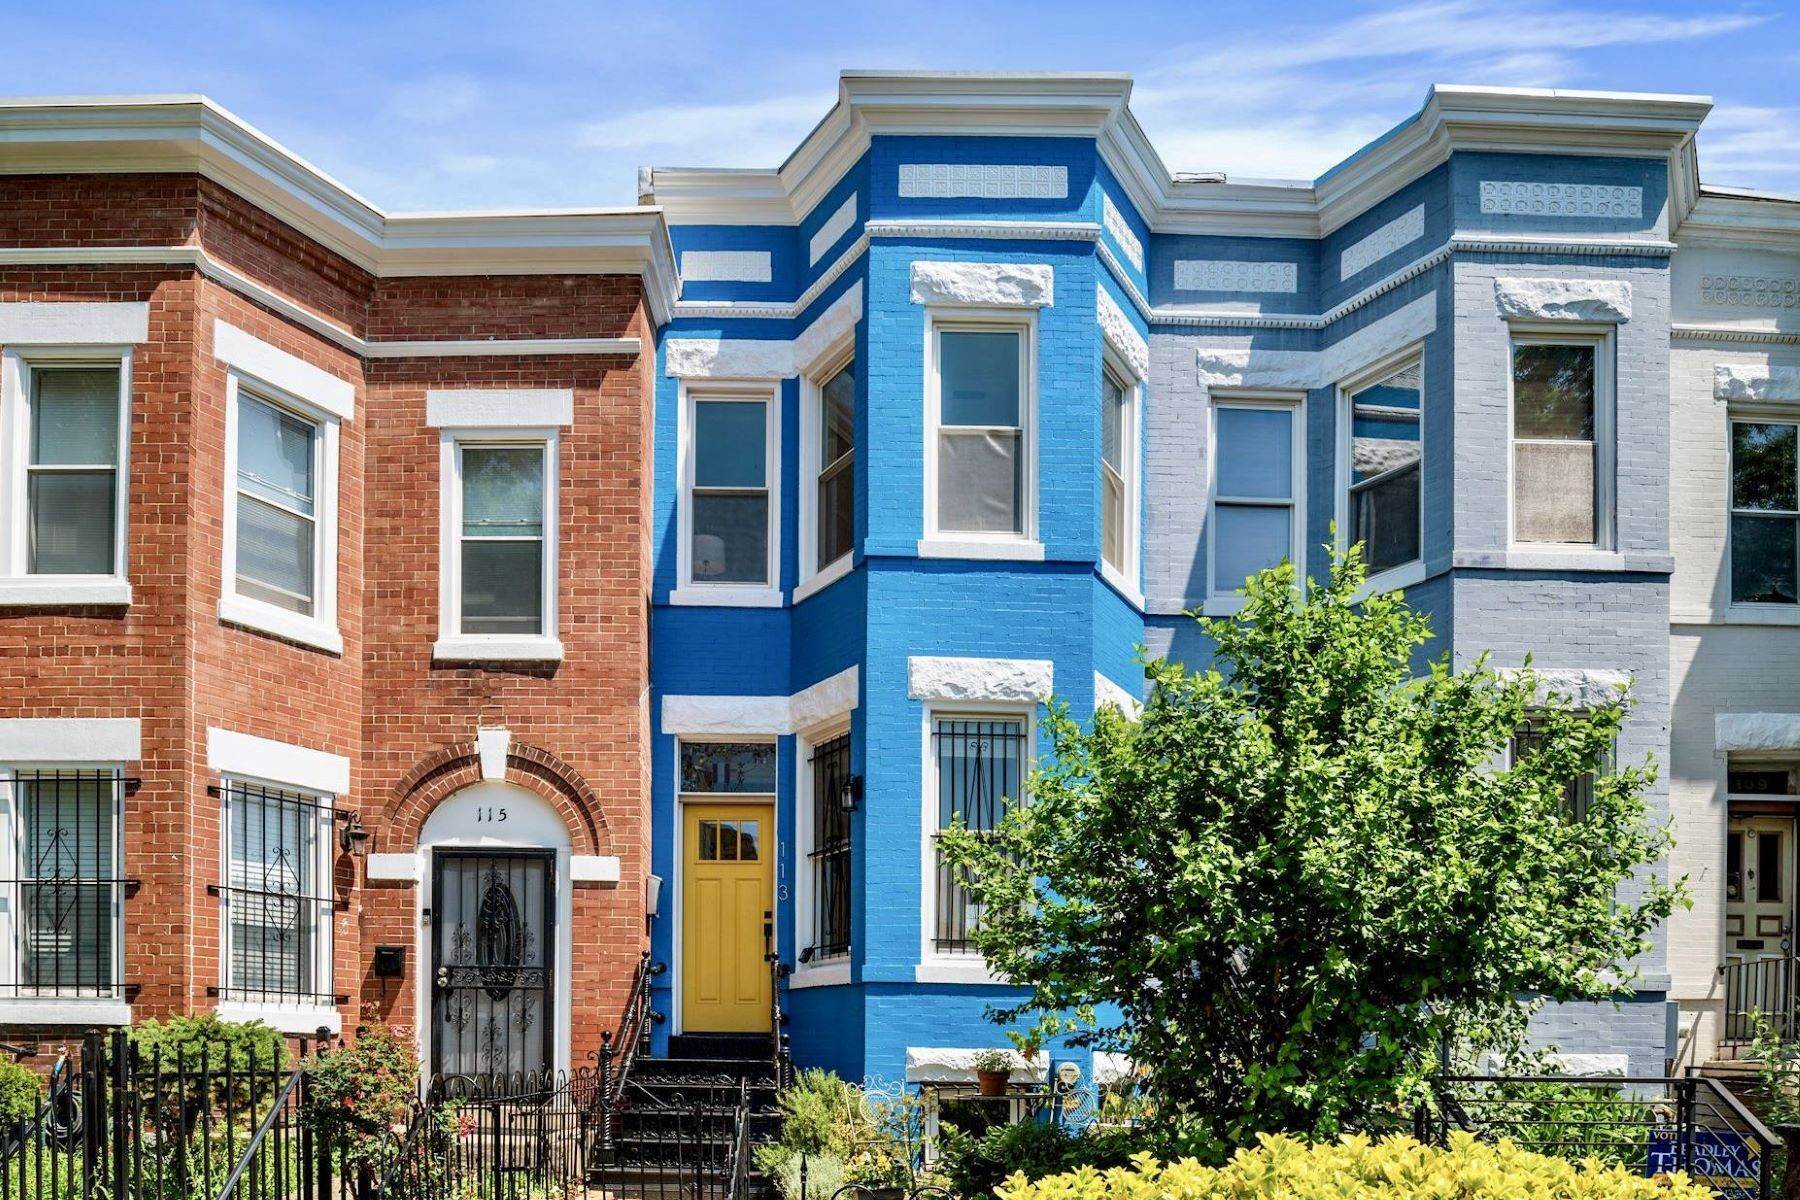 Other Residential Homes for Sale at 113 P St Nw Washington, District Of Columbia 20001 United States